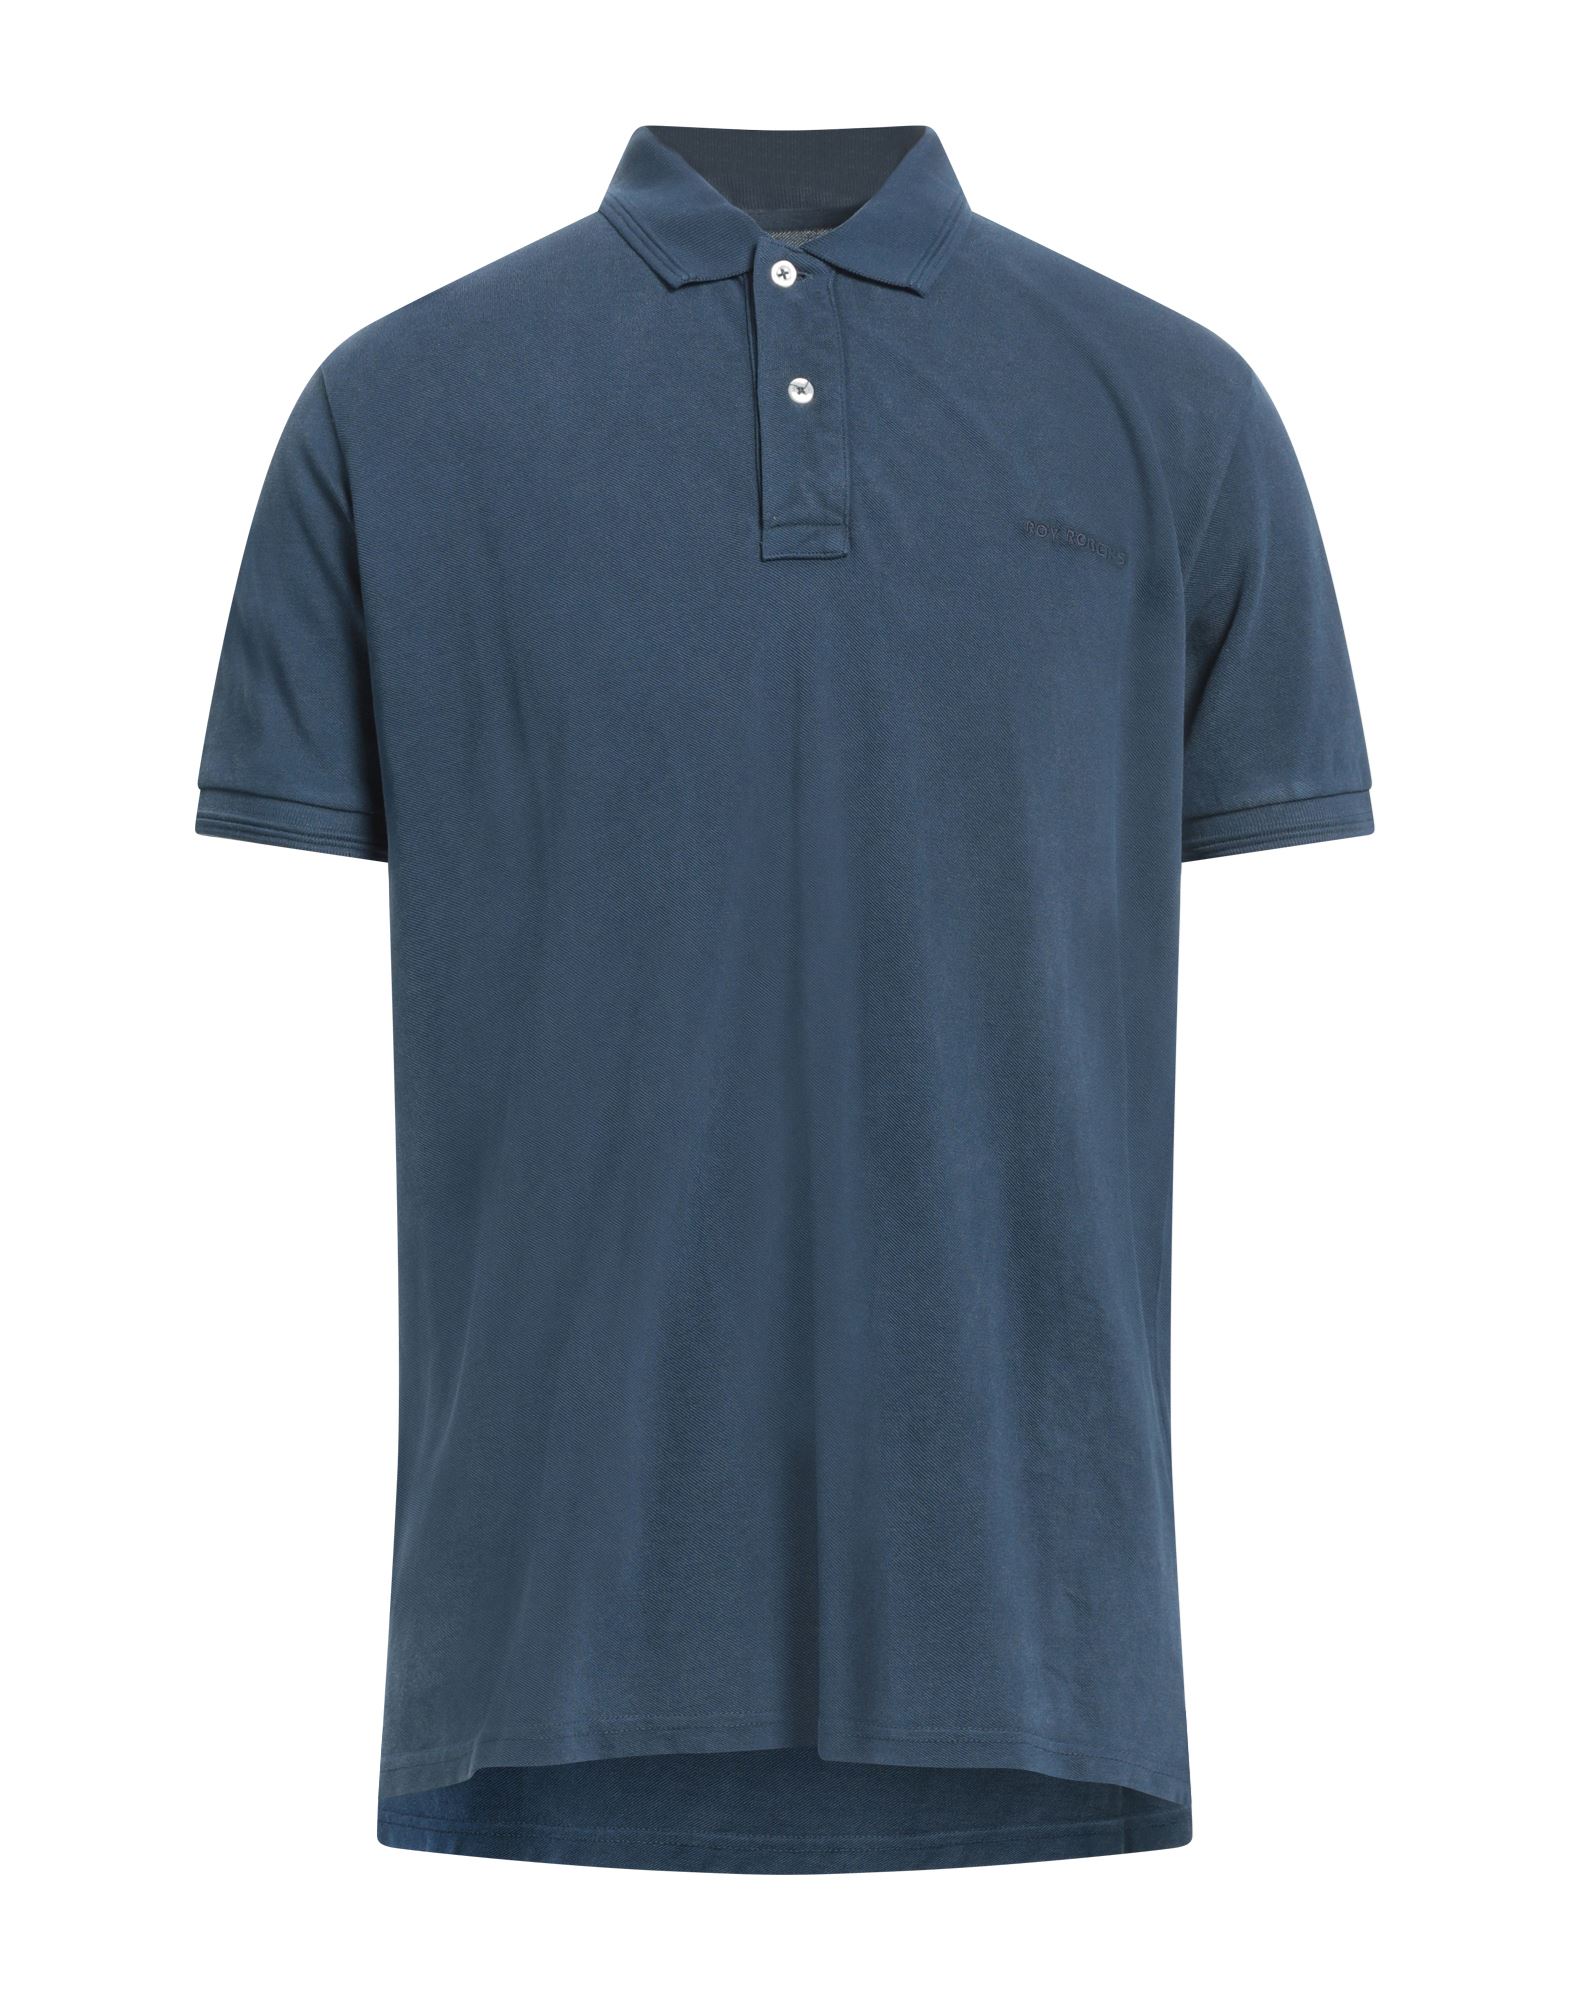 Roy Rogers Polo Shirts In Navy Blue